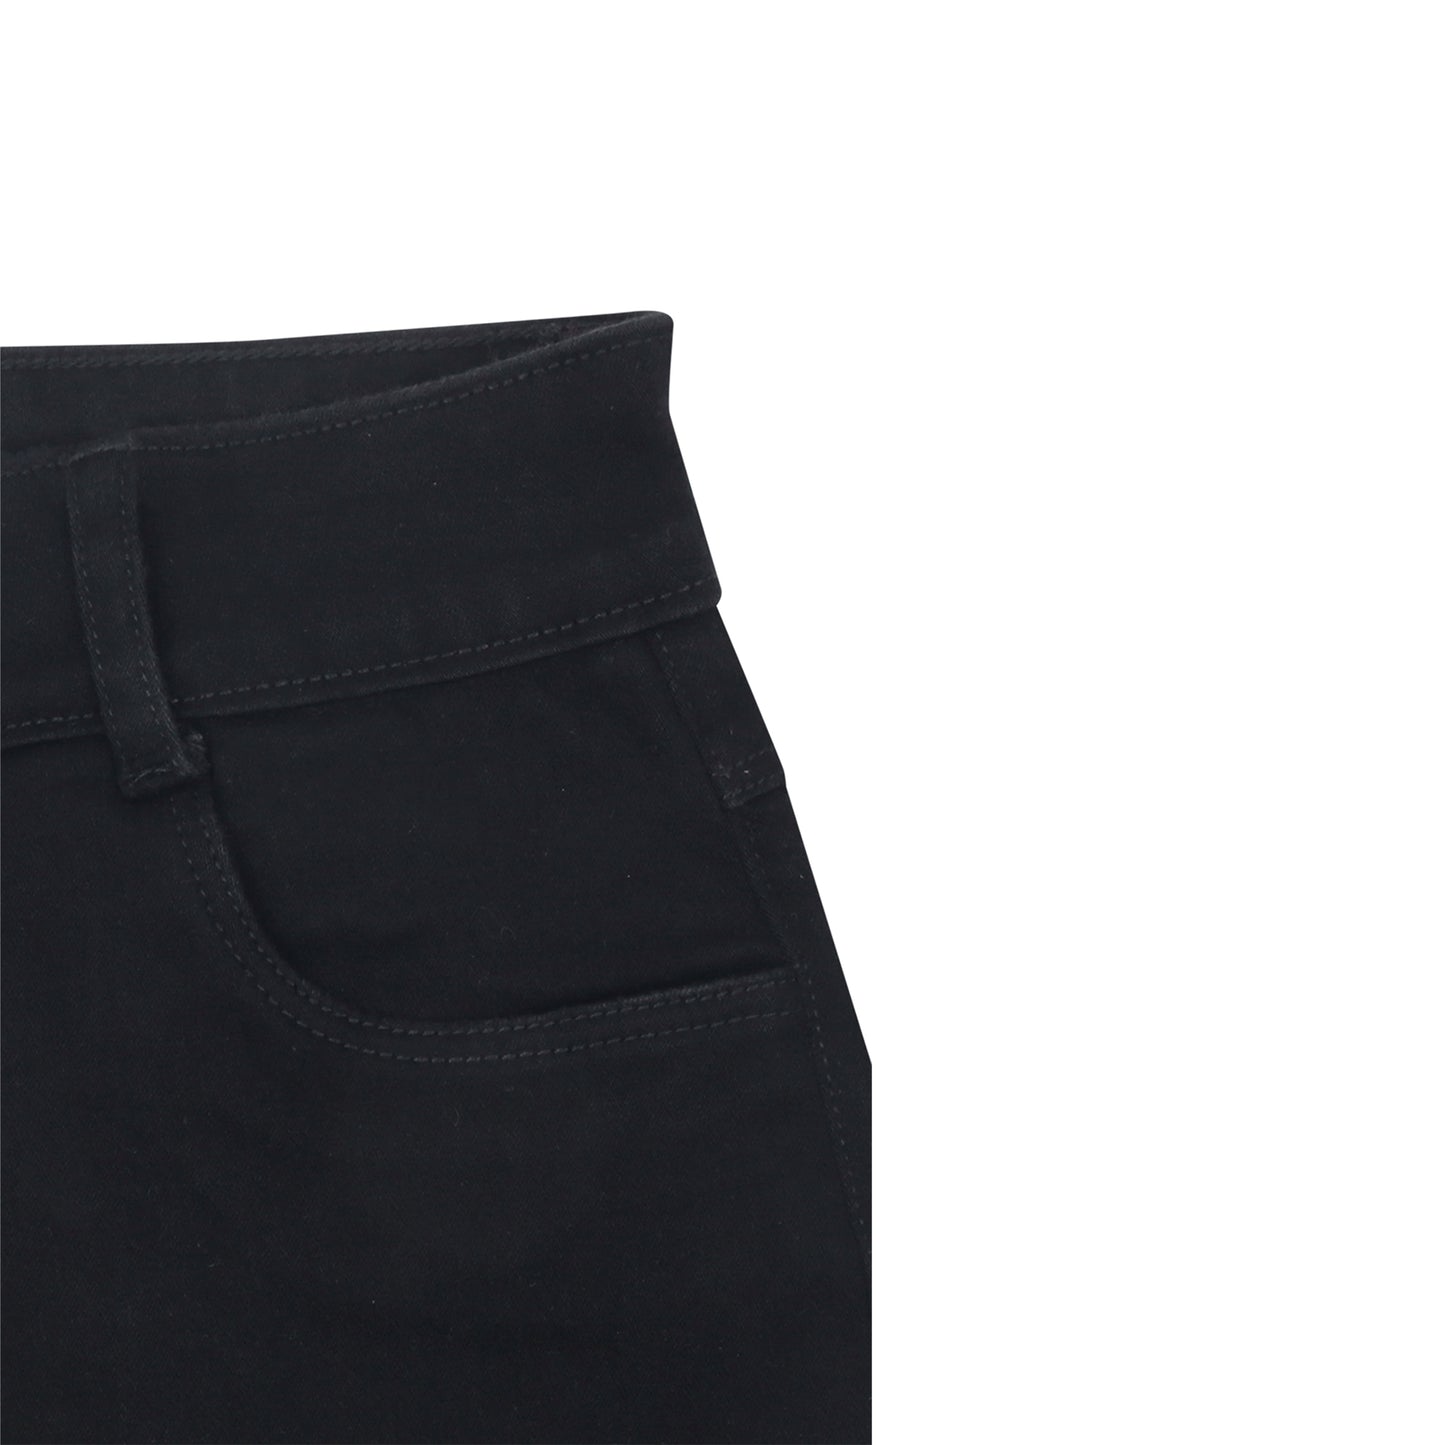 Basic Black Shorts With Girl Patch In Back Pocket